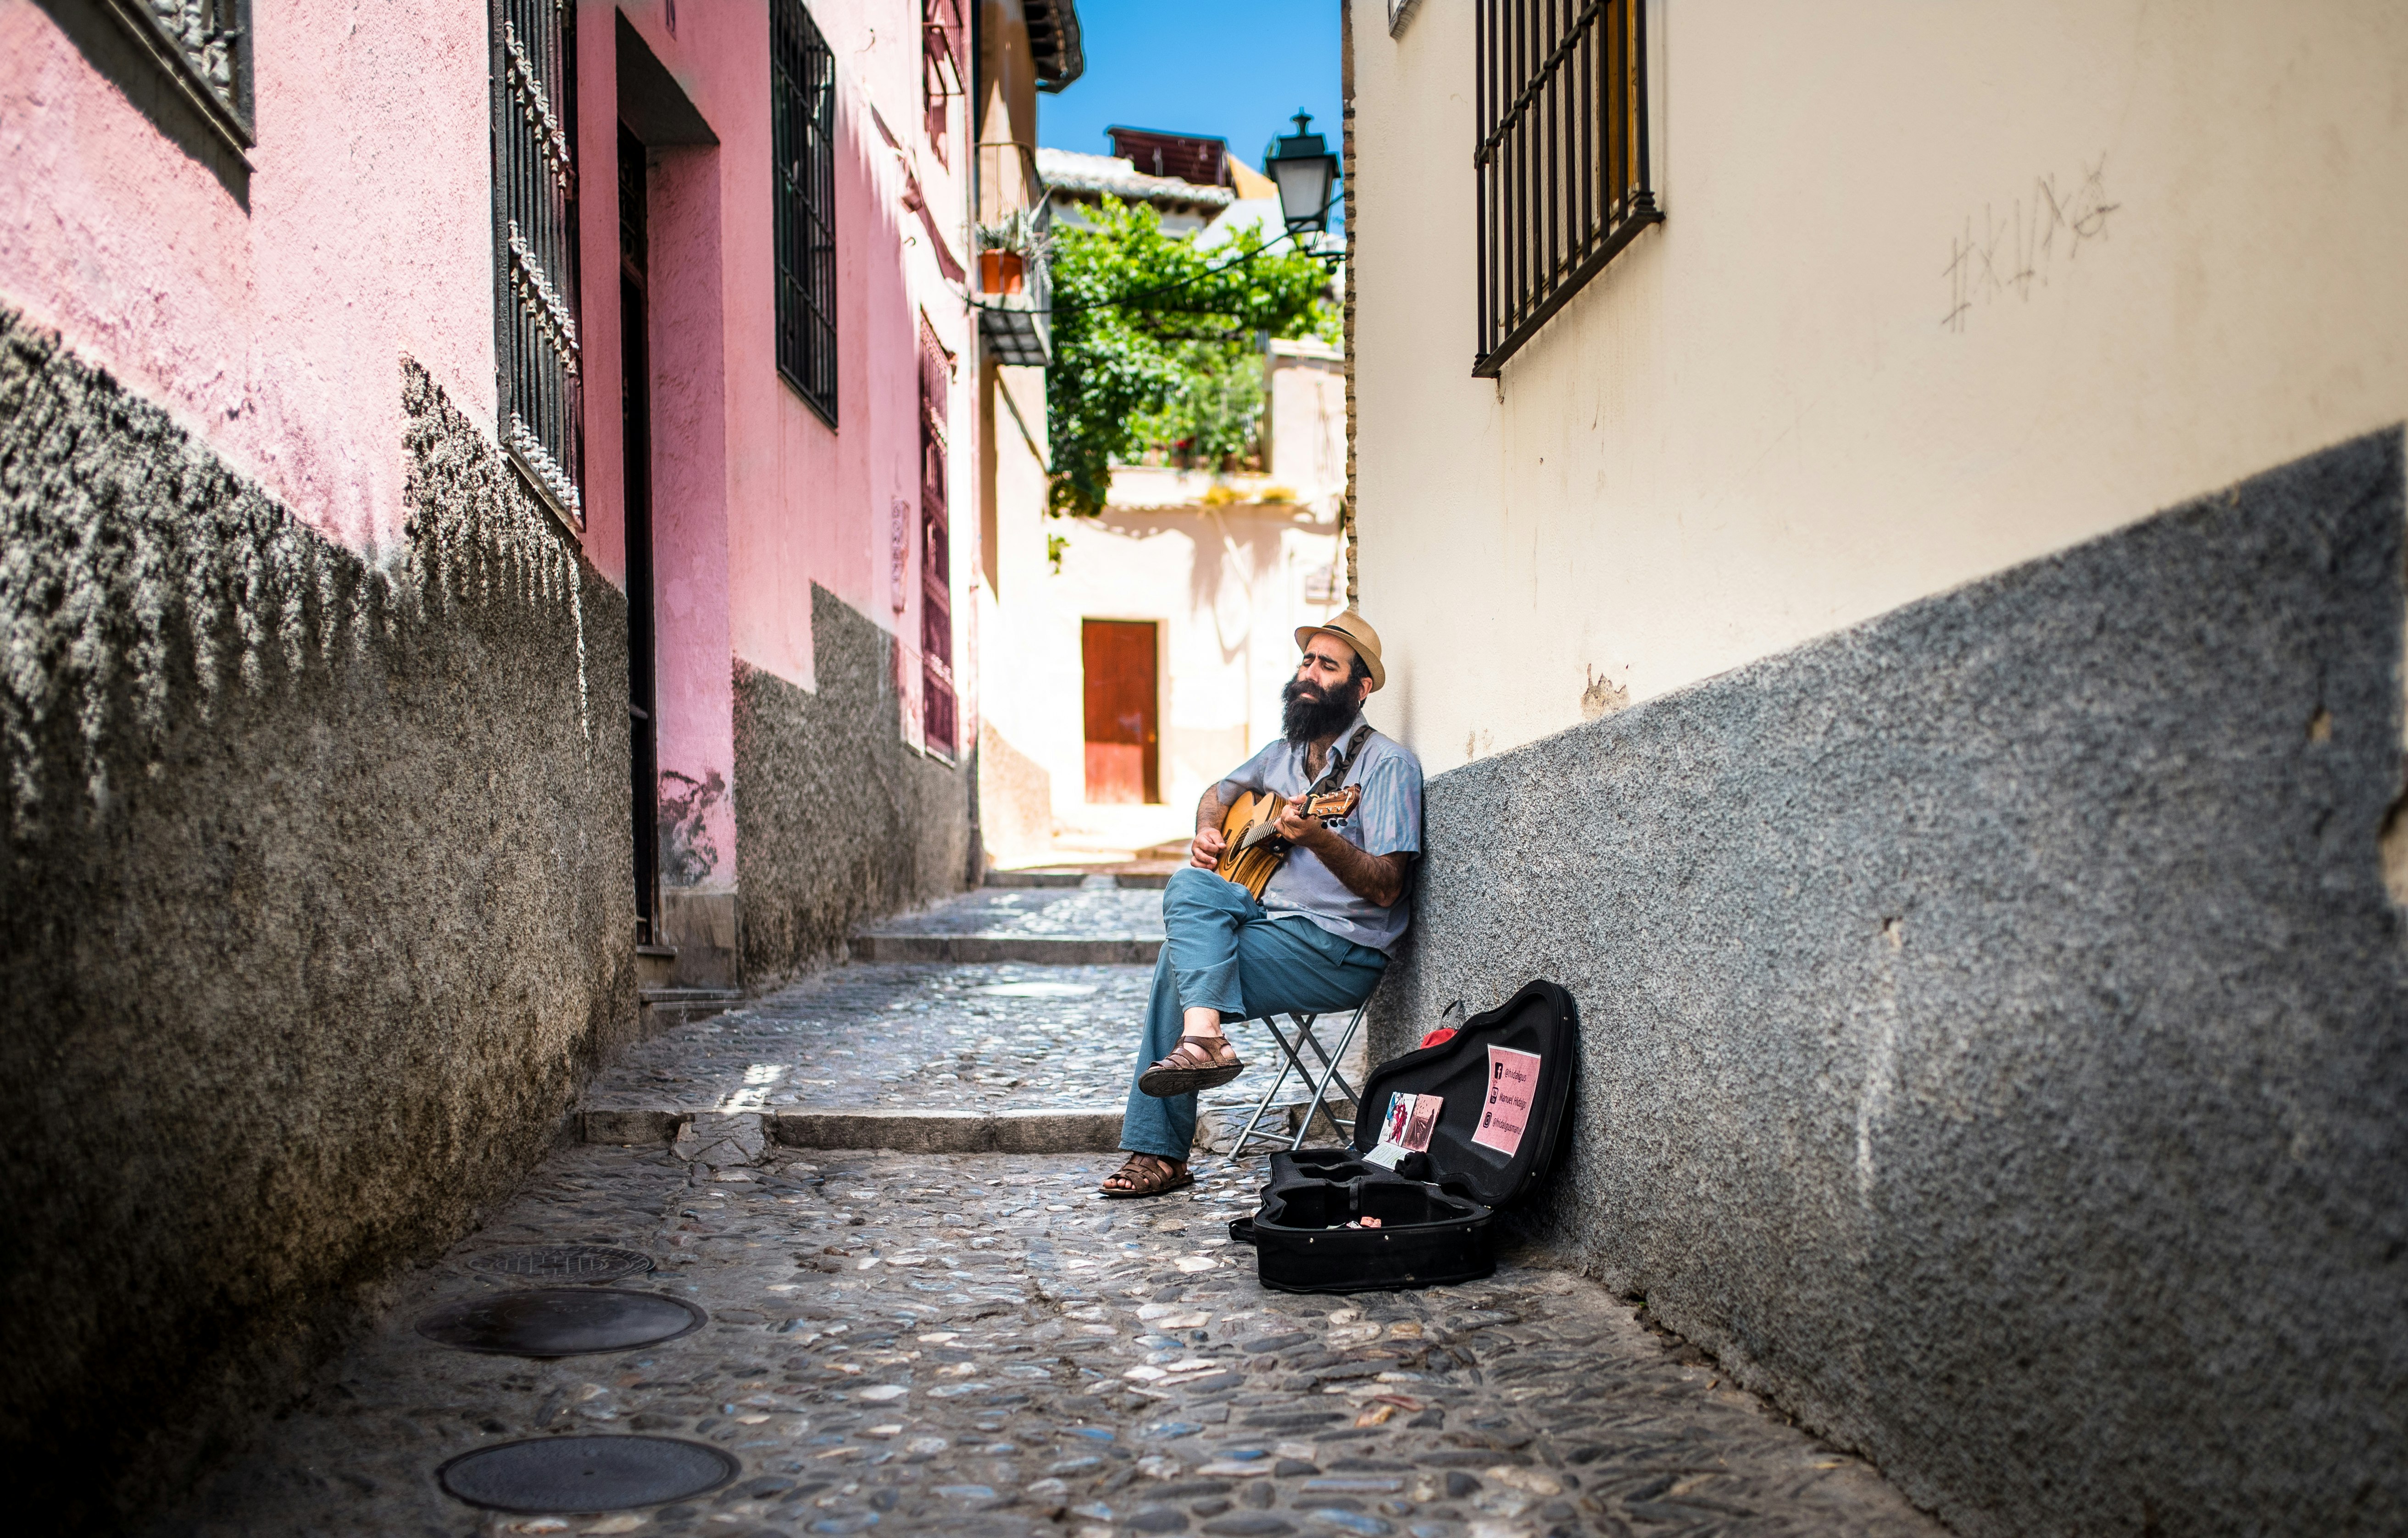 sitting man playing guitar with open guitar bag on side on allway